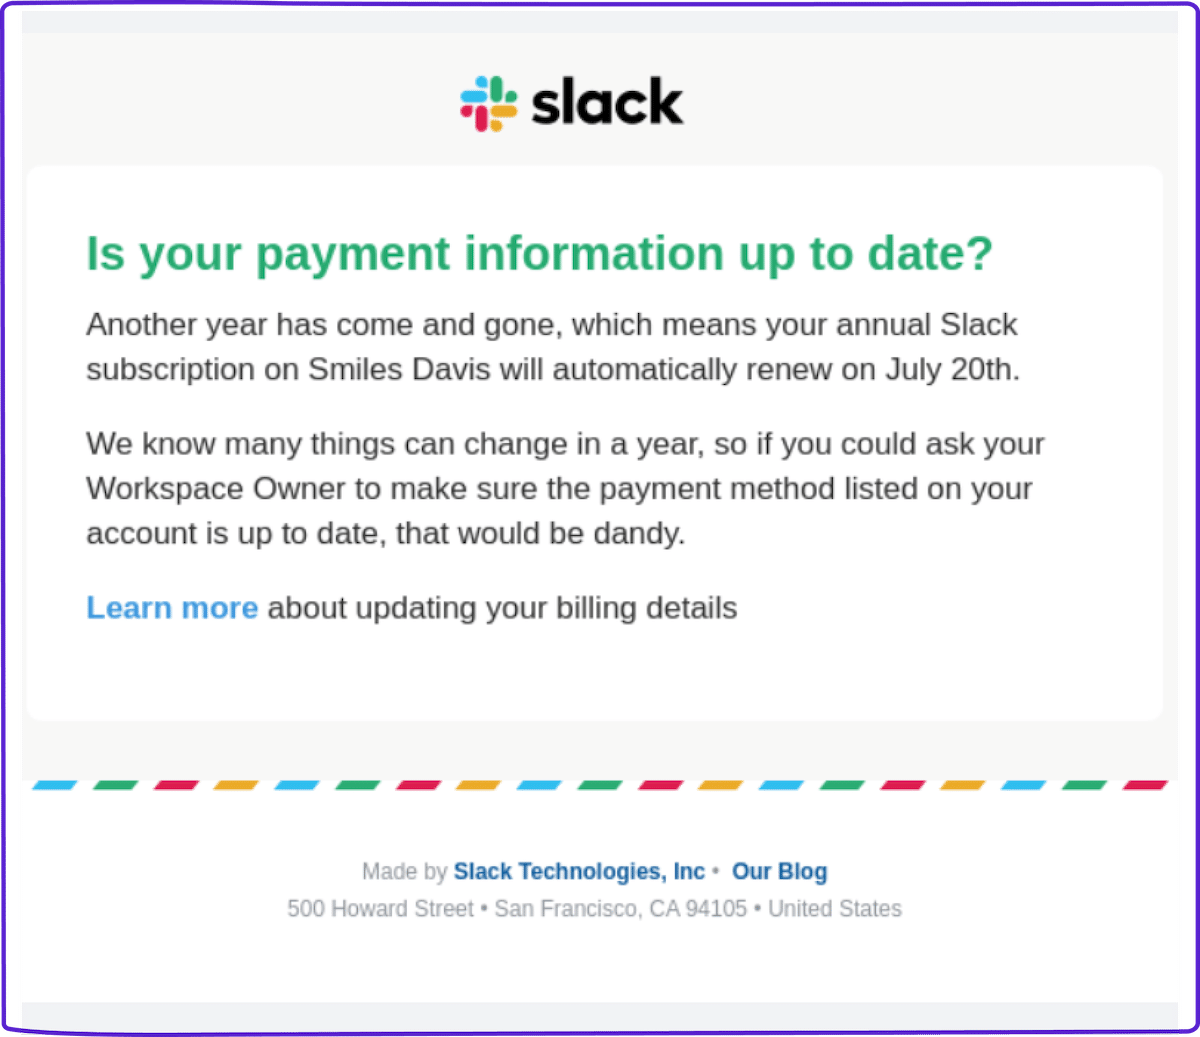 Dunning email example: Slack